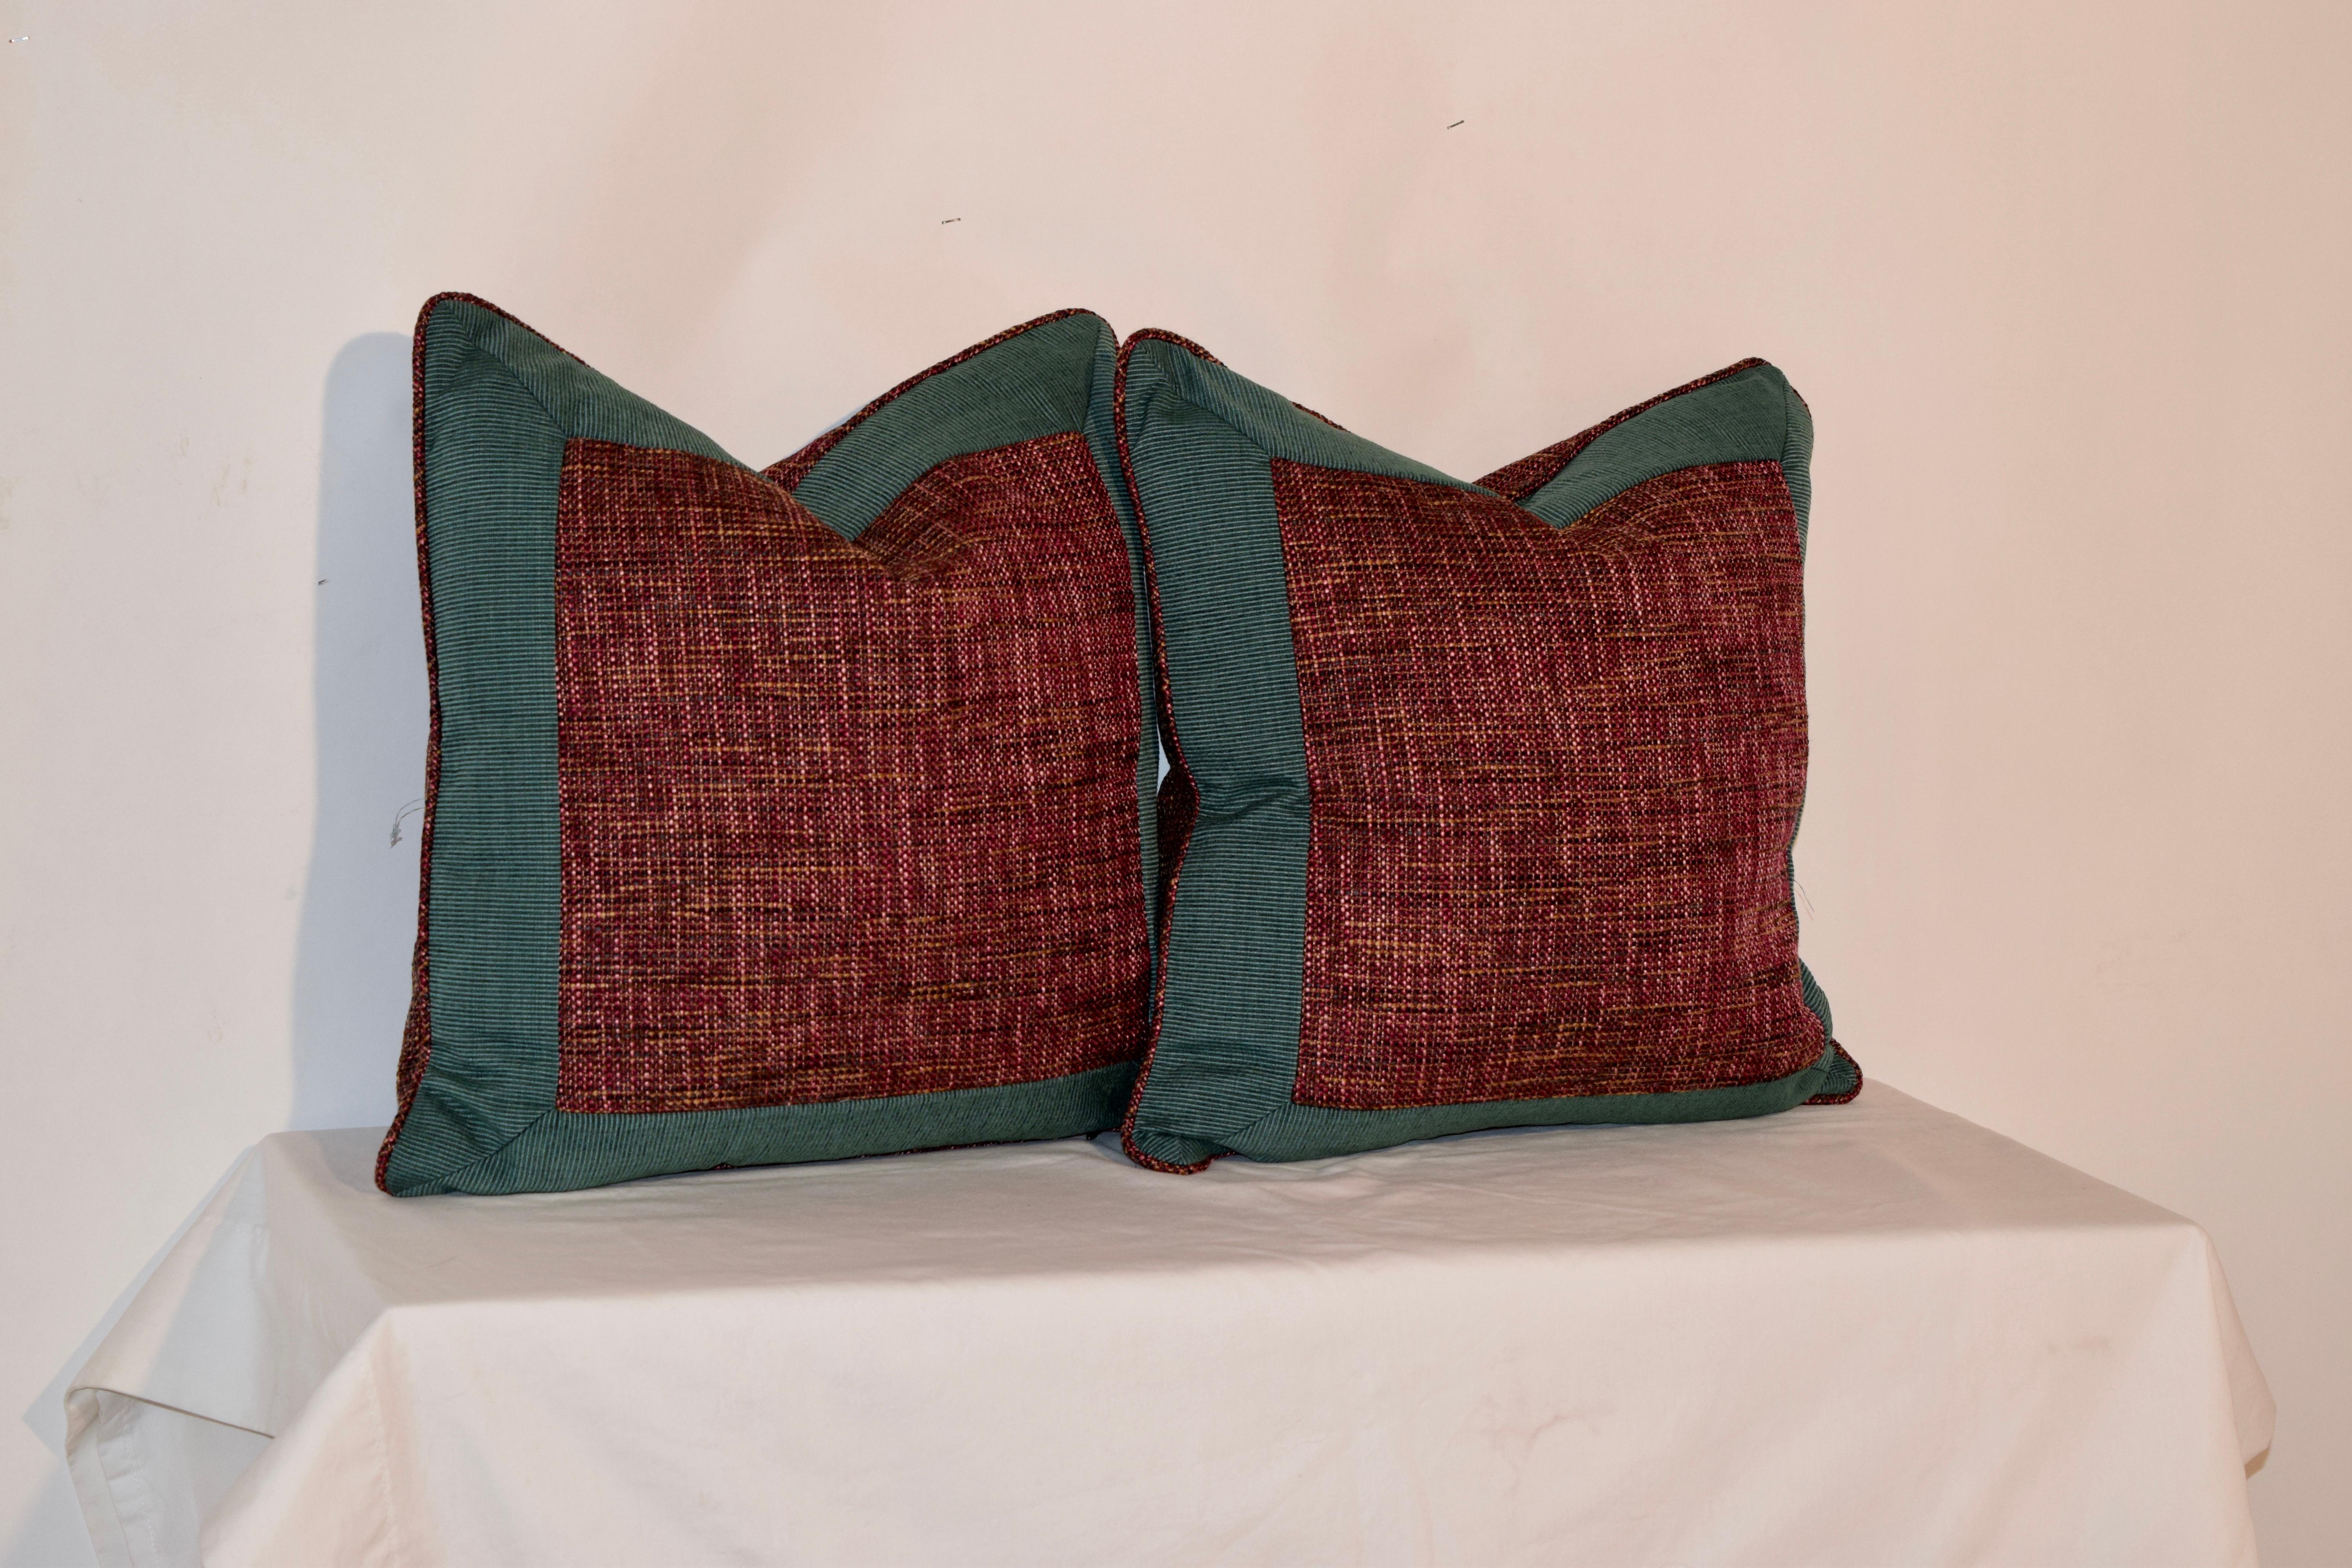 American Handmade Bordered Pillows For Sale